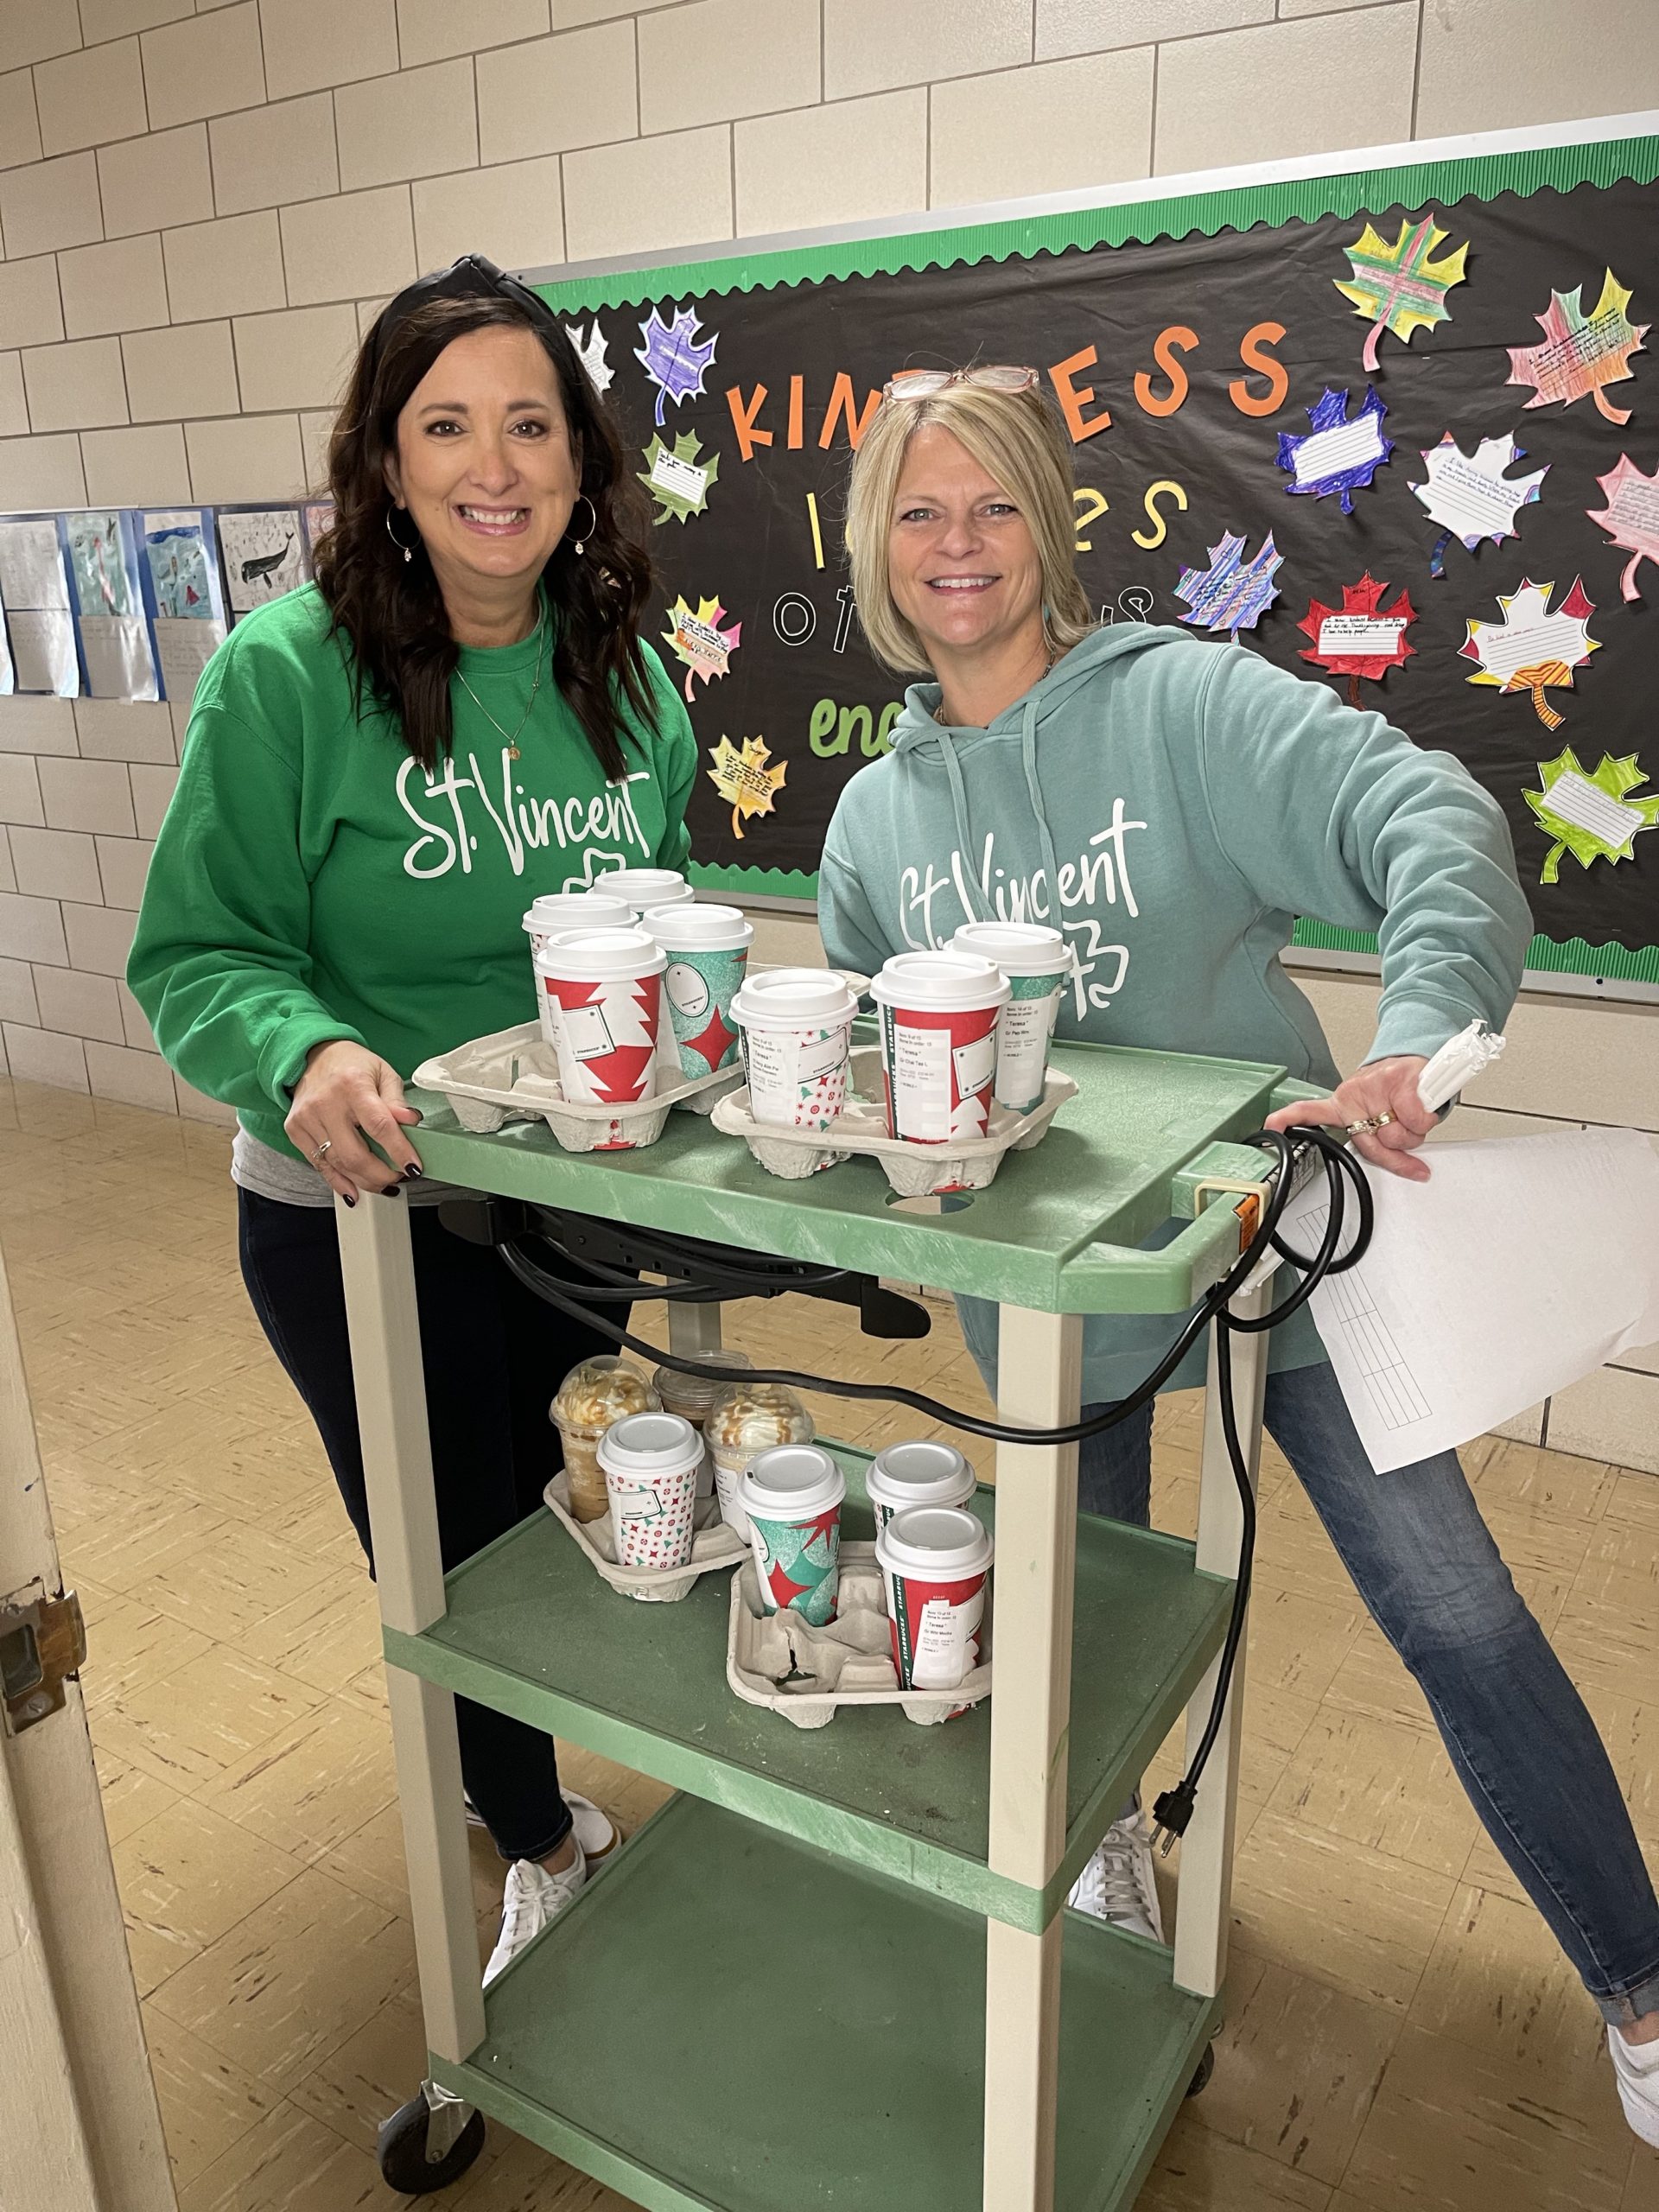 Mrs. underwood and Mrs. Kovacs delivering coffee to teachers and staff.